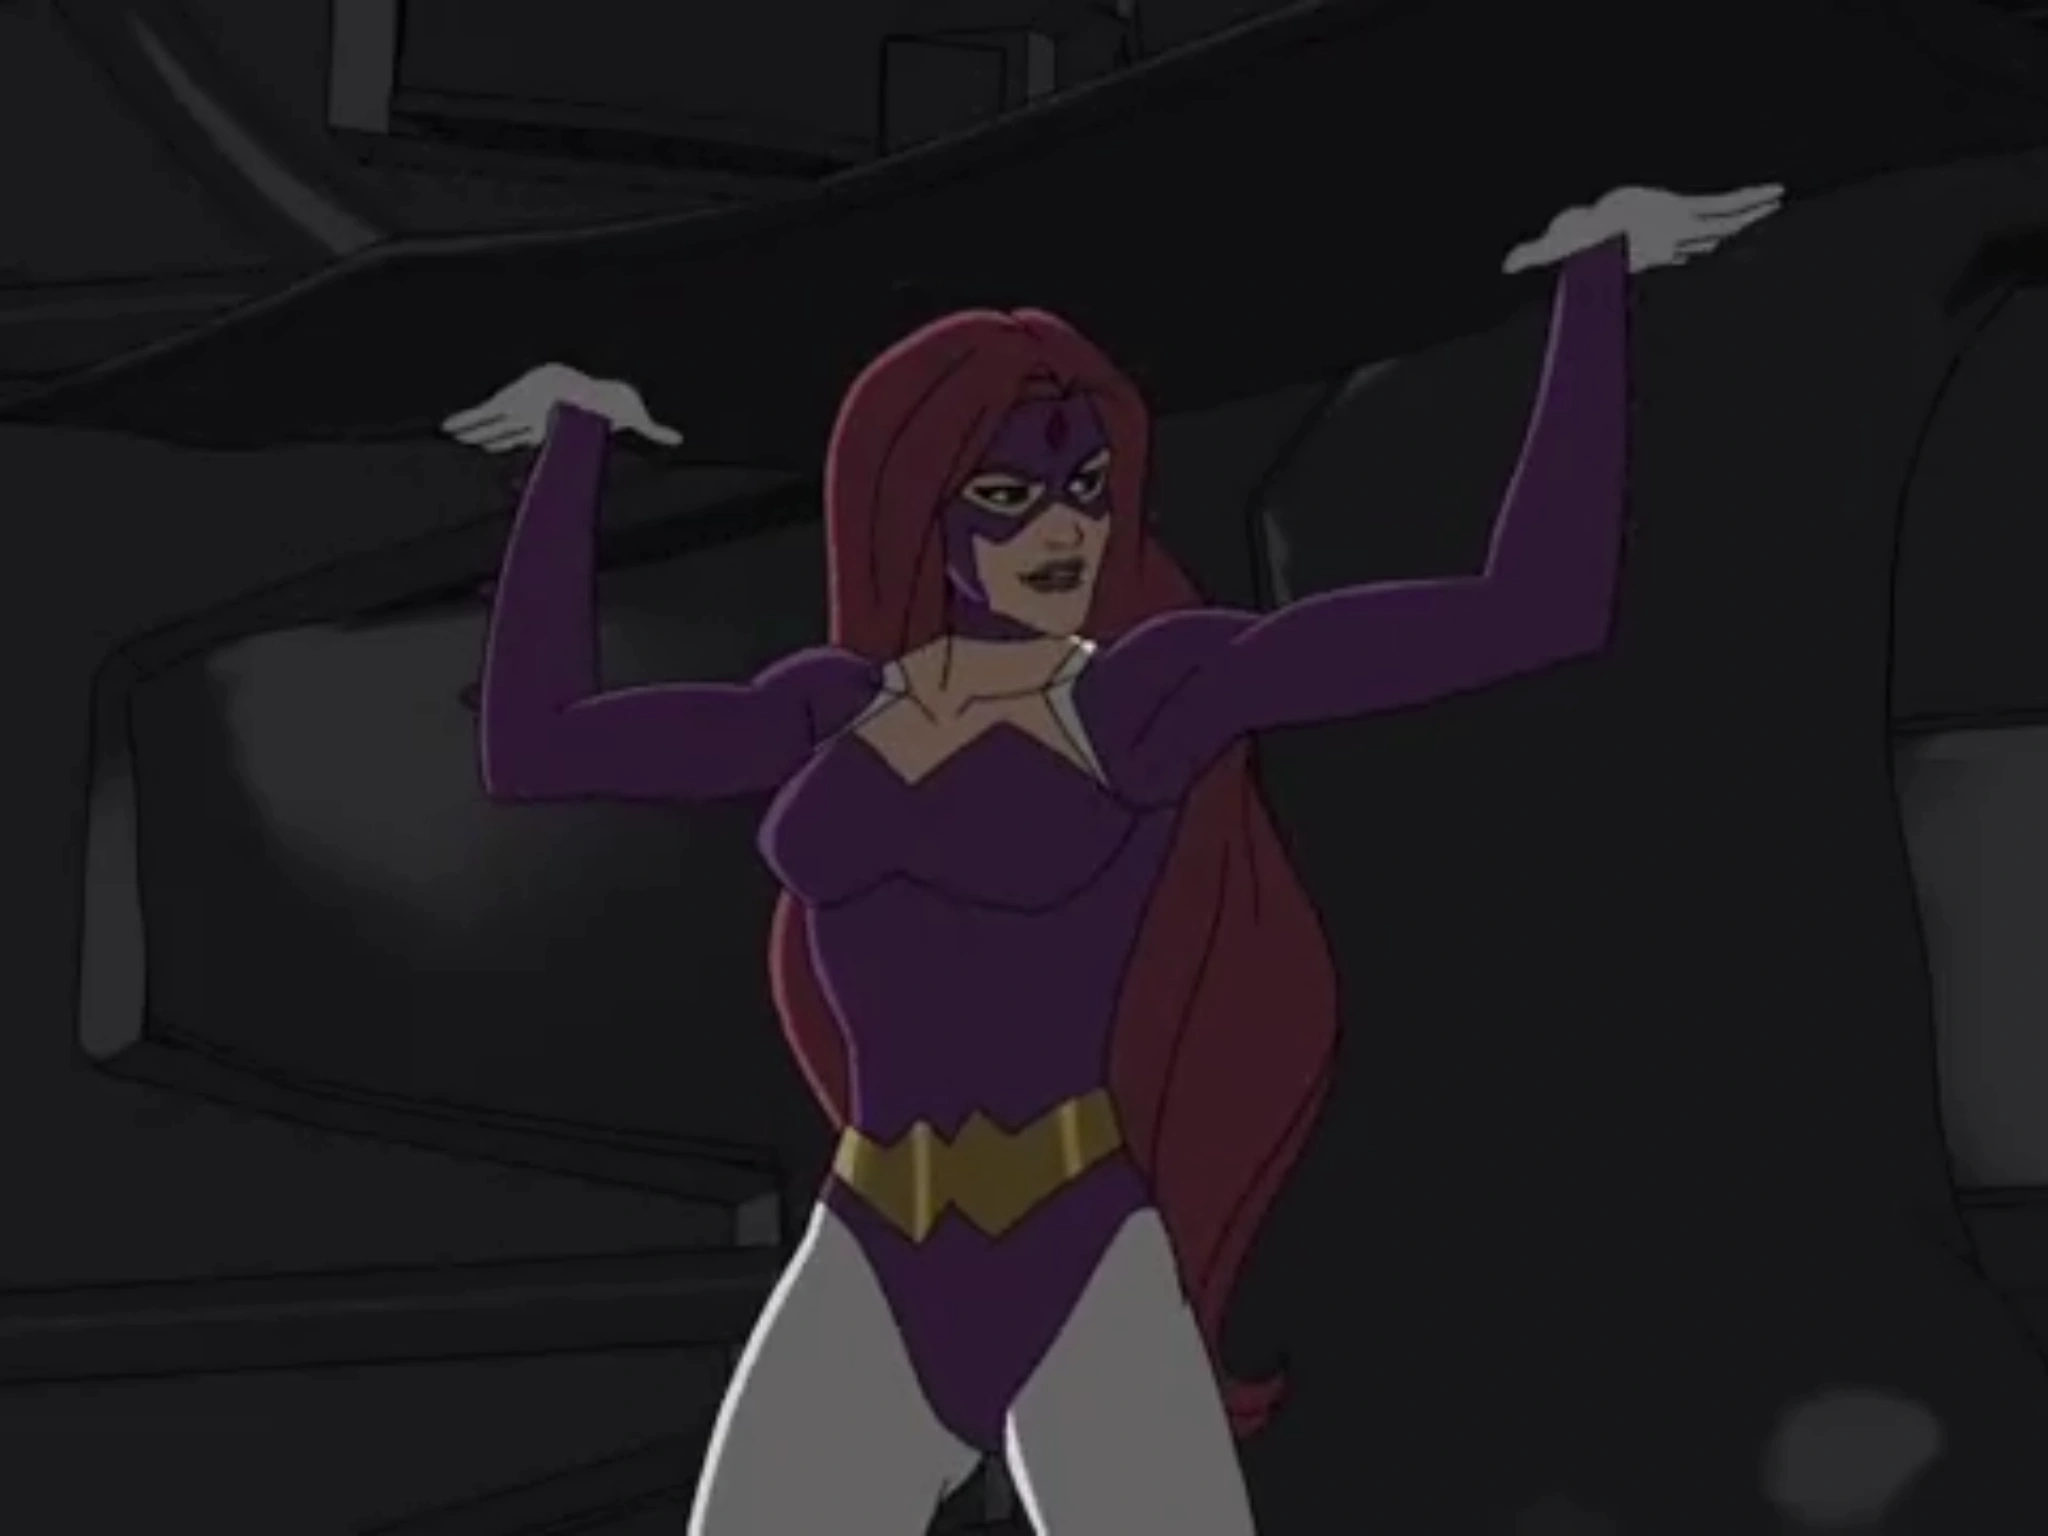 Her presence in the animated universe